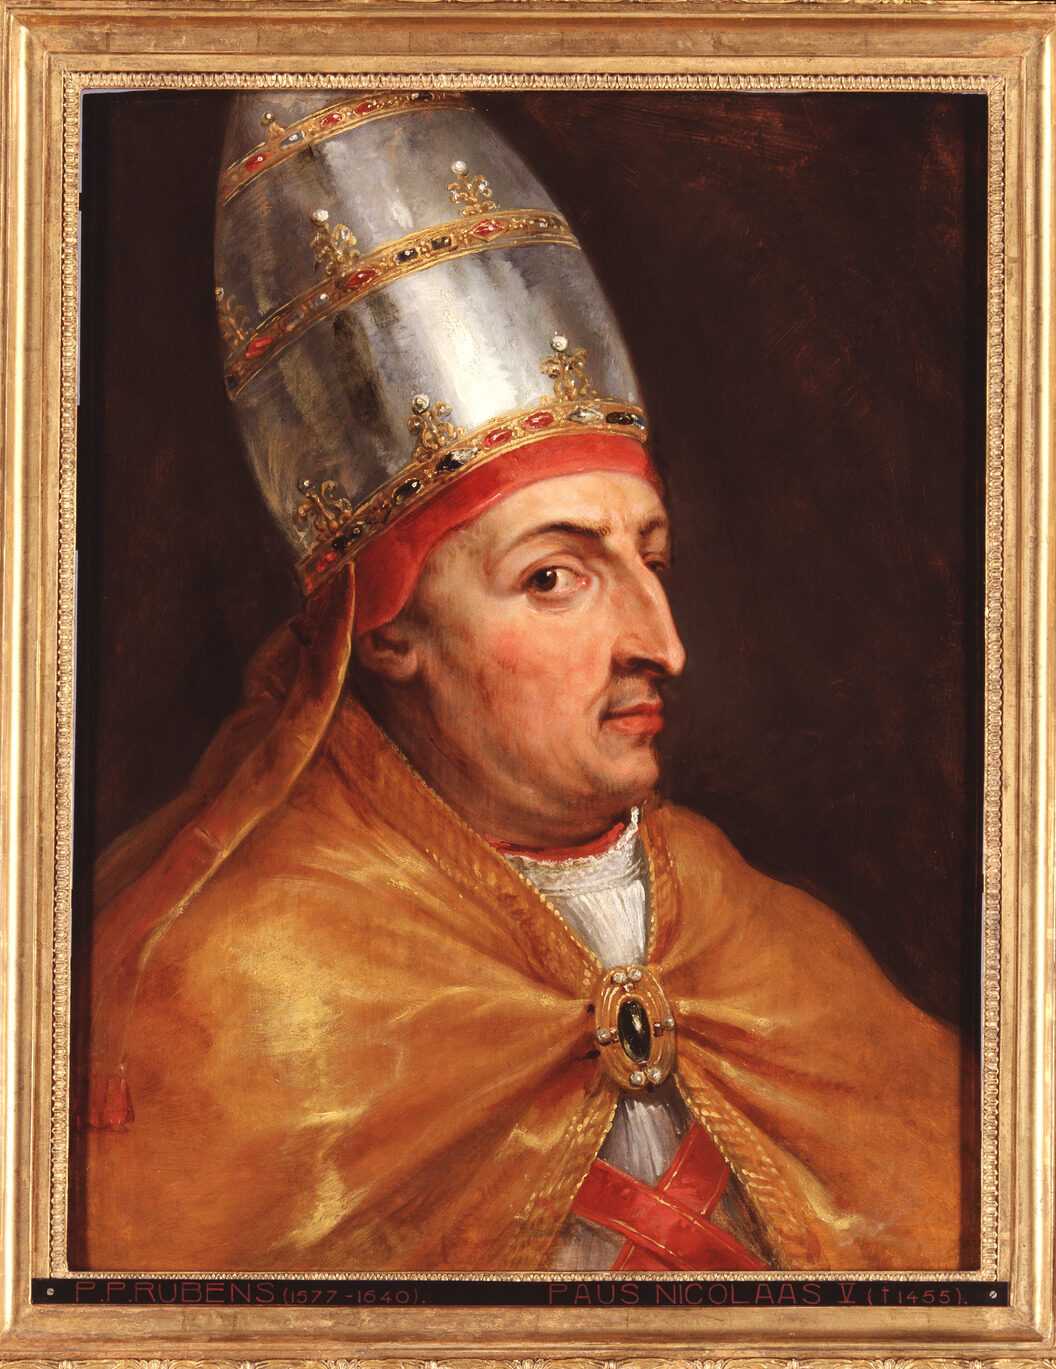 A painted portrait of Pope Nicholas V in a gold frame. The pope is waring a metal like mitre and orange dressing gown.